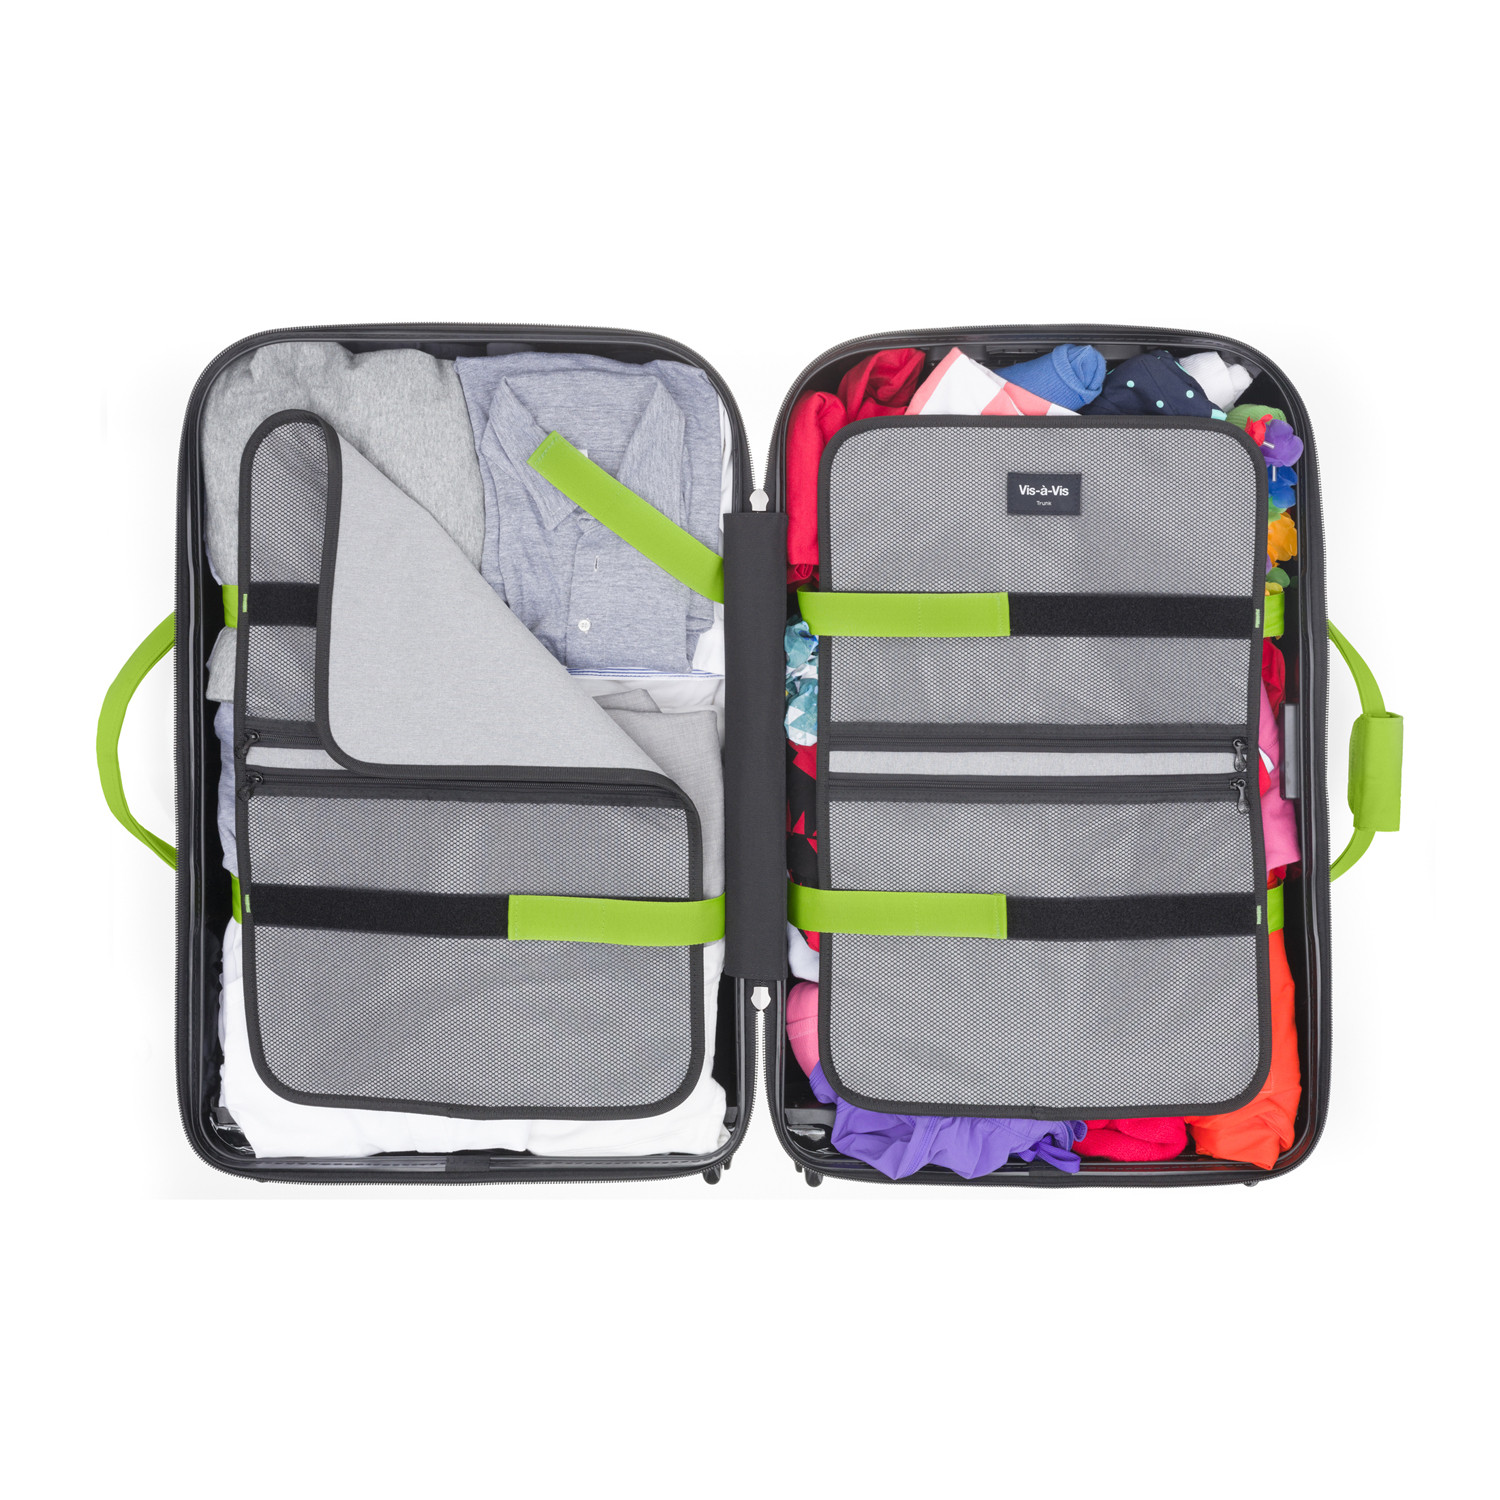 Vis-A-Vis Trunk Check-In Luggage // 30.7